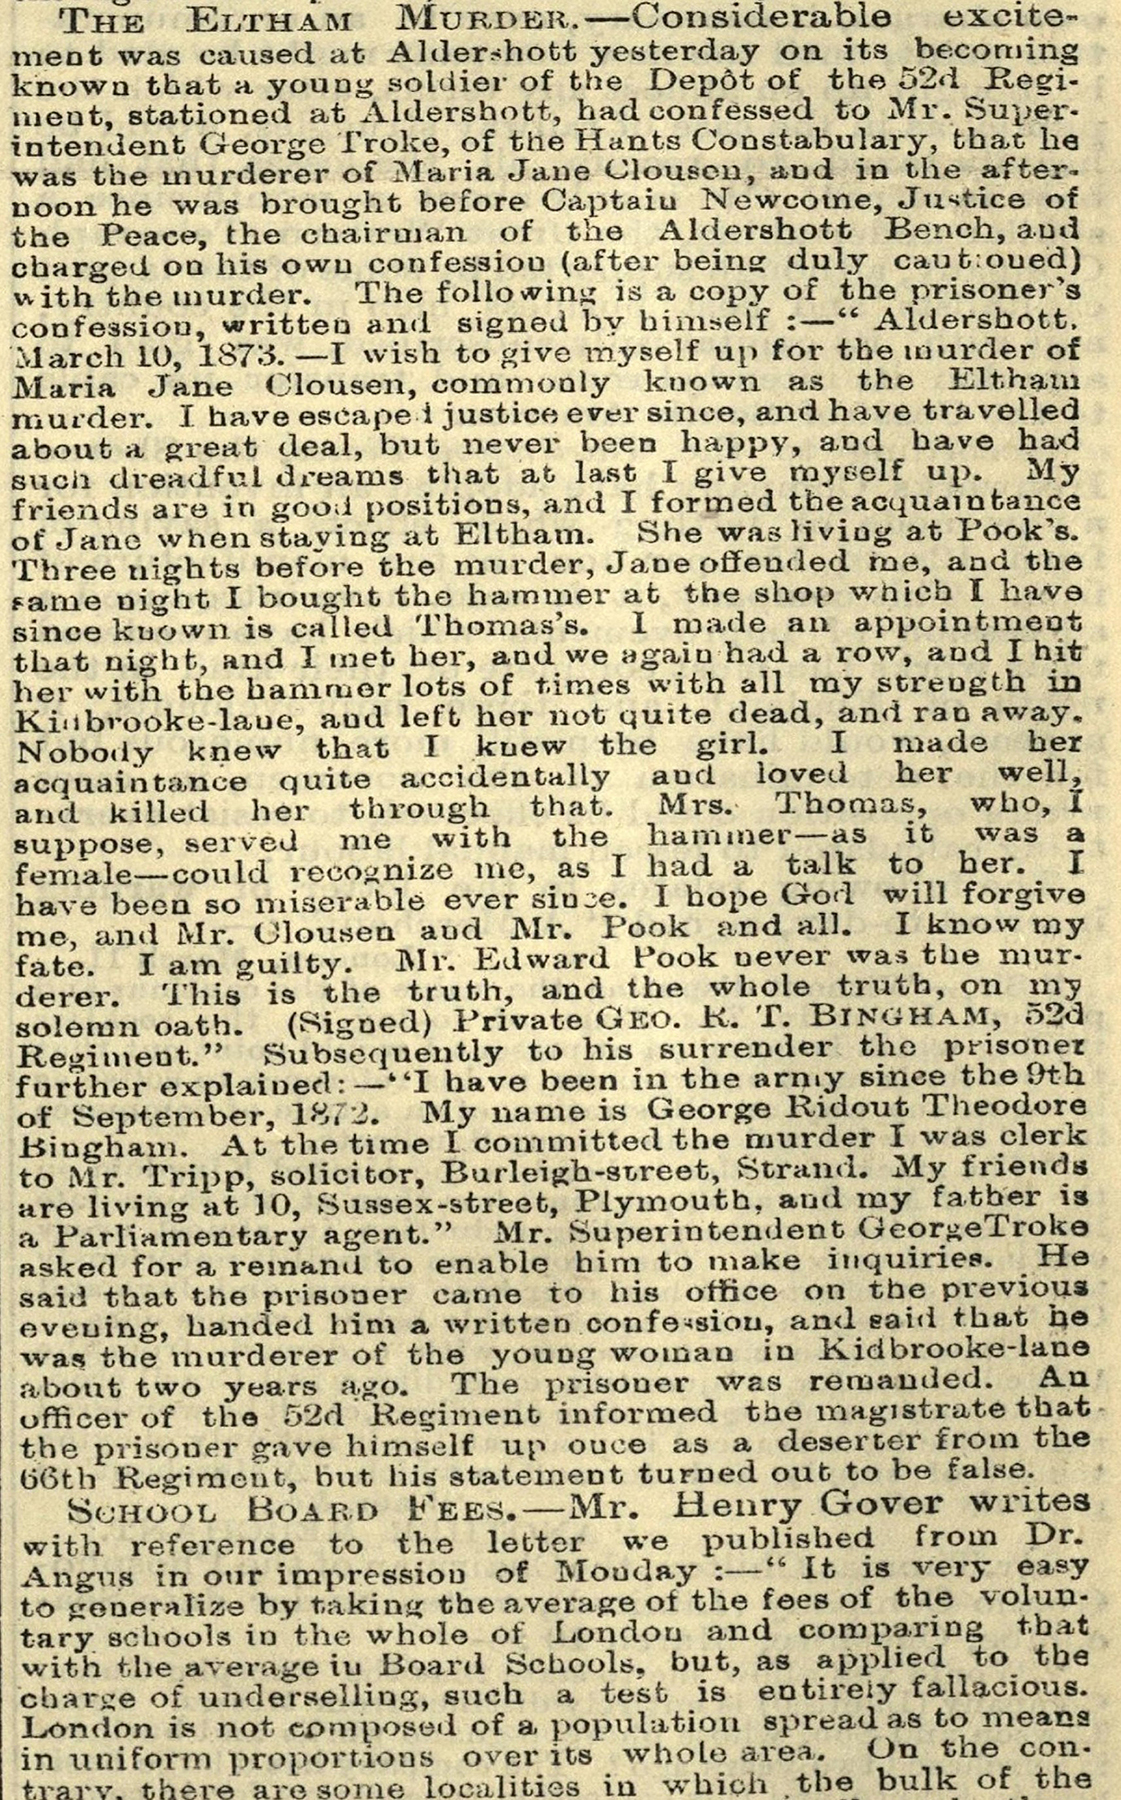 The Times, 12 March 1873